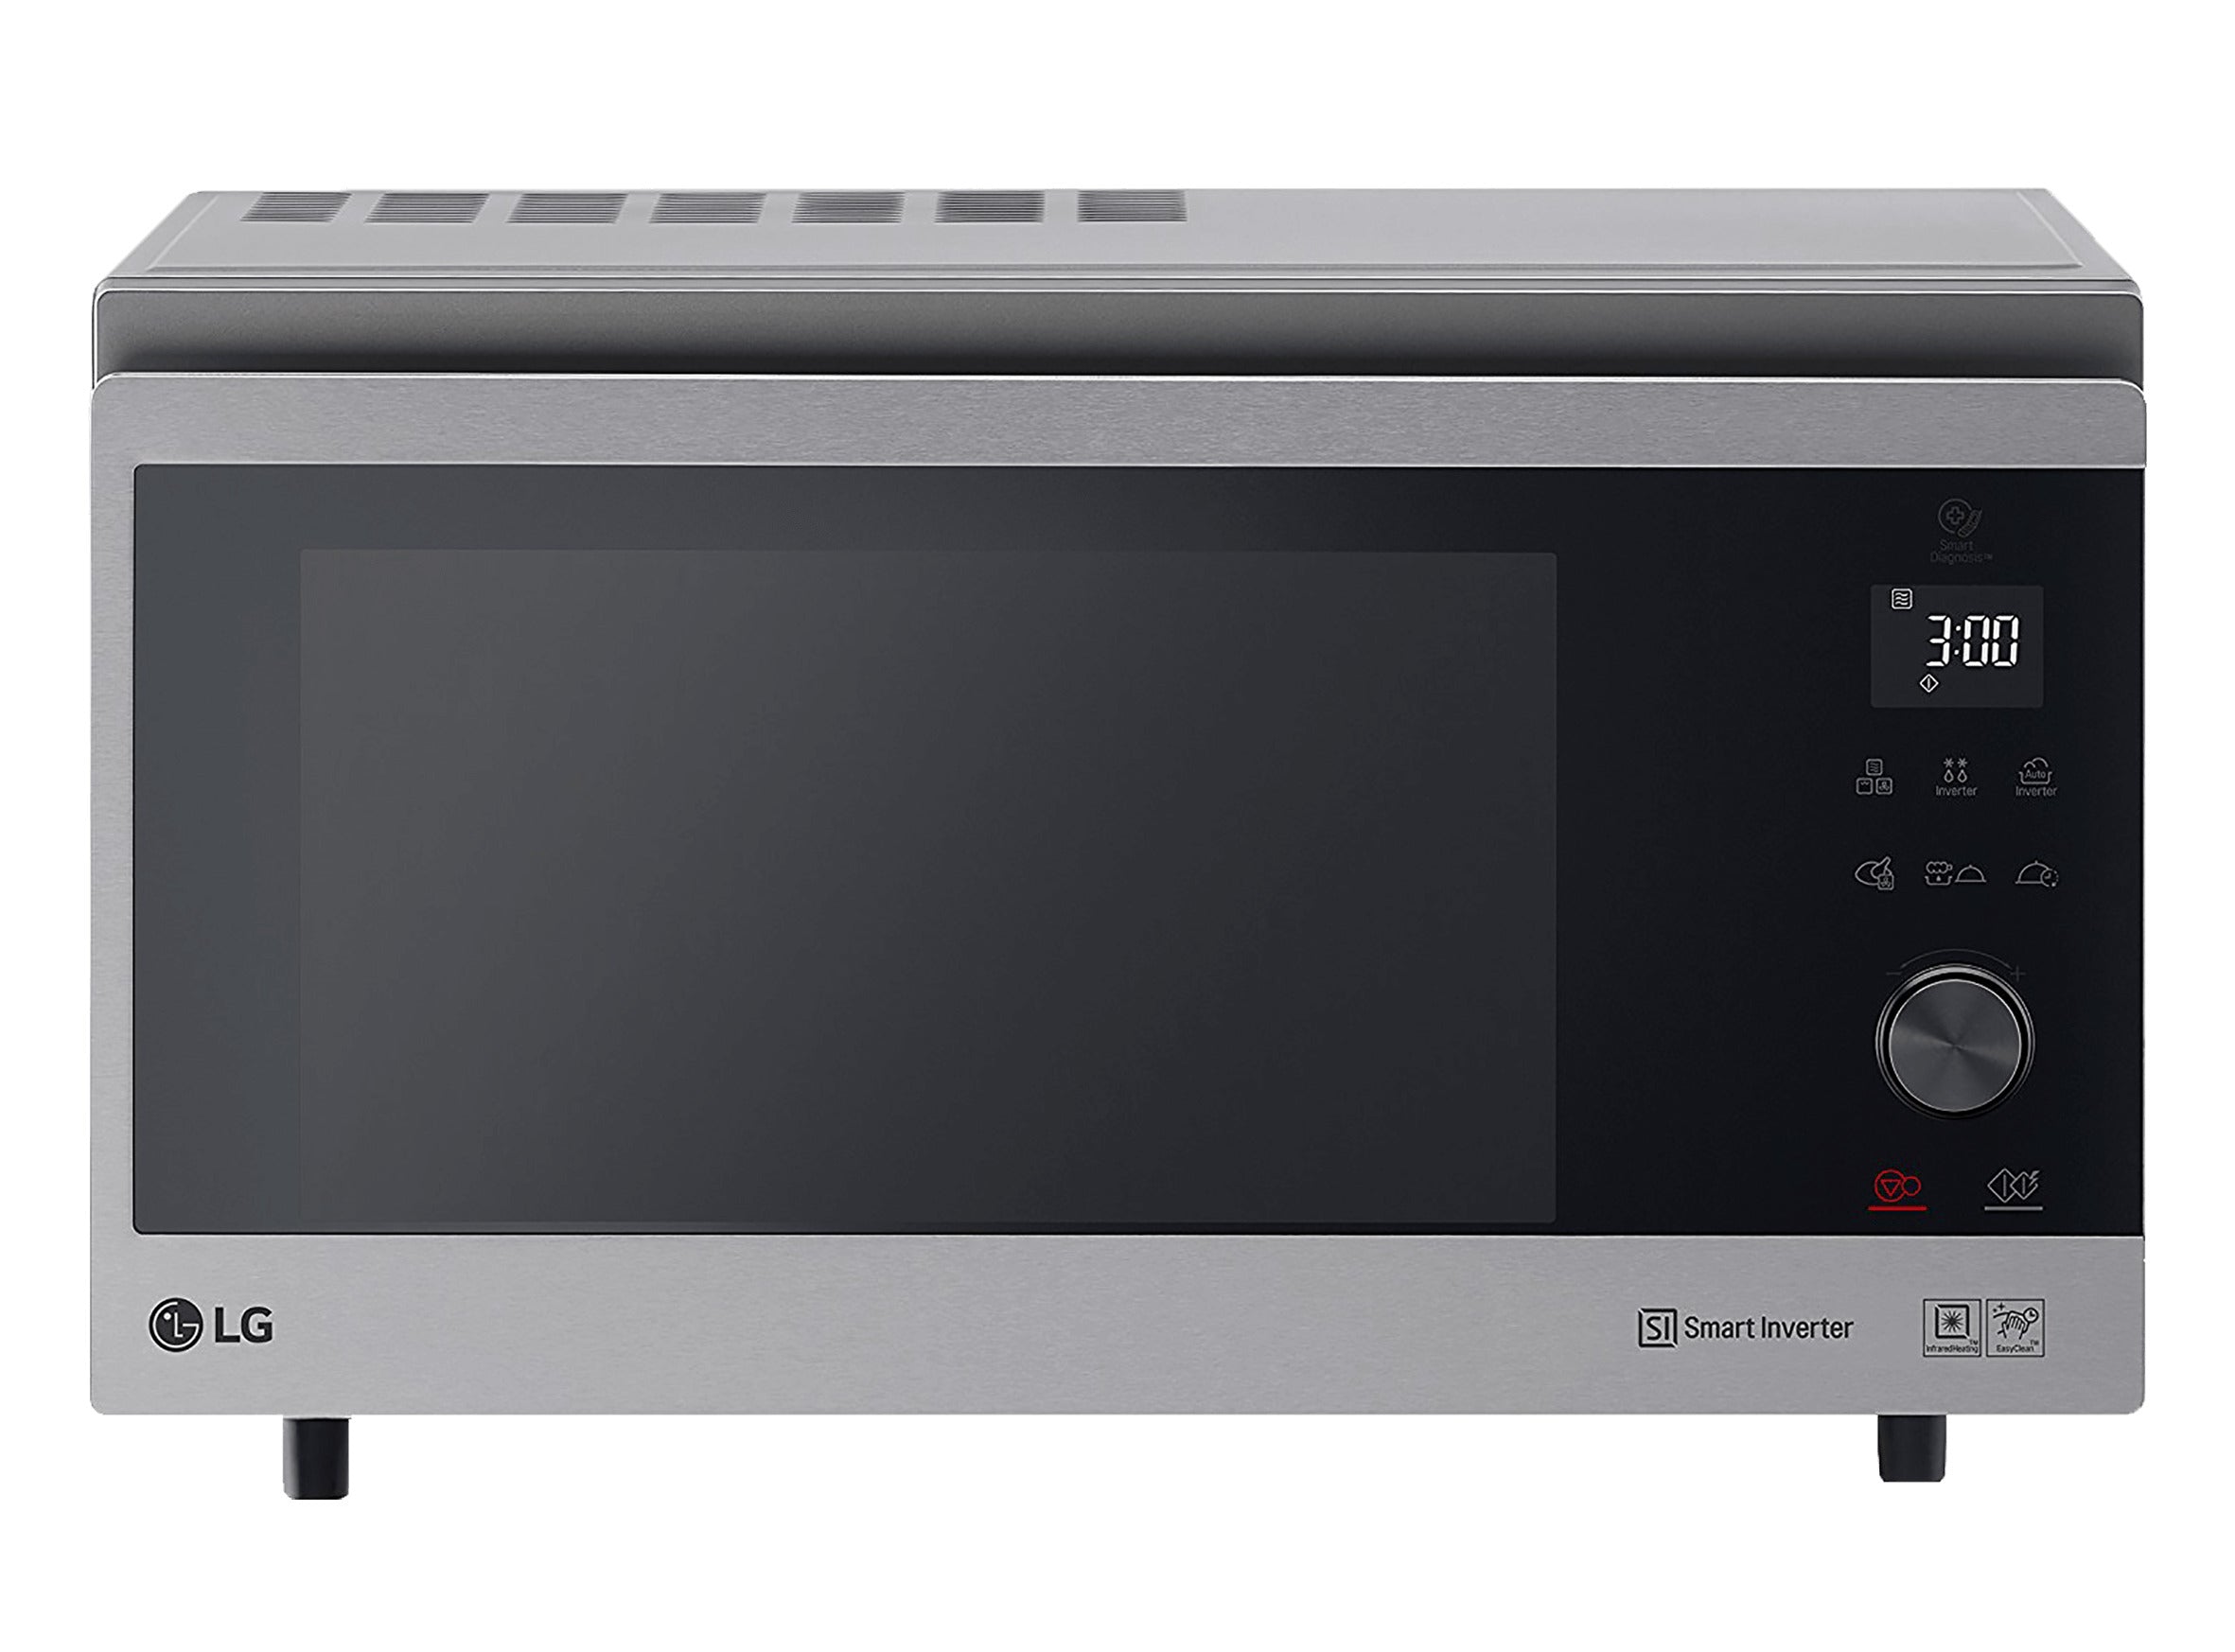 LG 39L Microwave Oven Stainless Steel MJ3965ACS